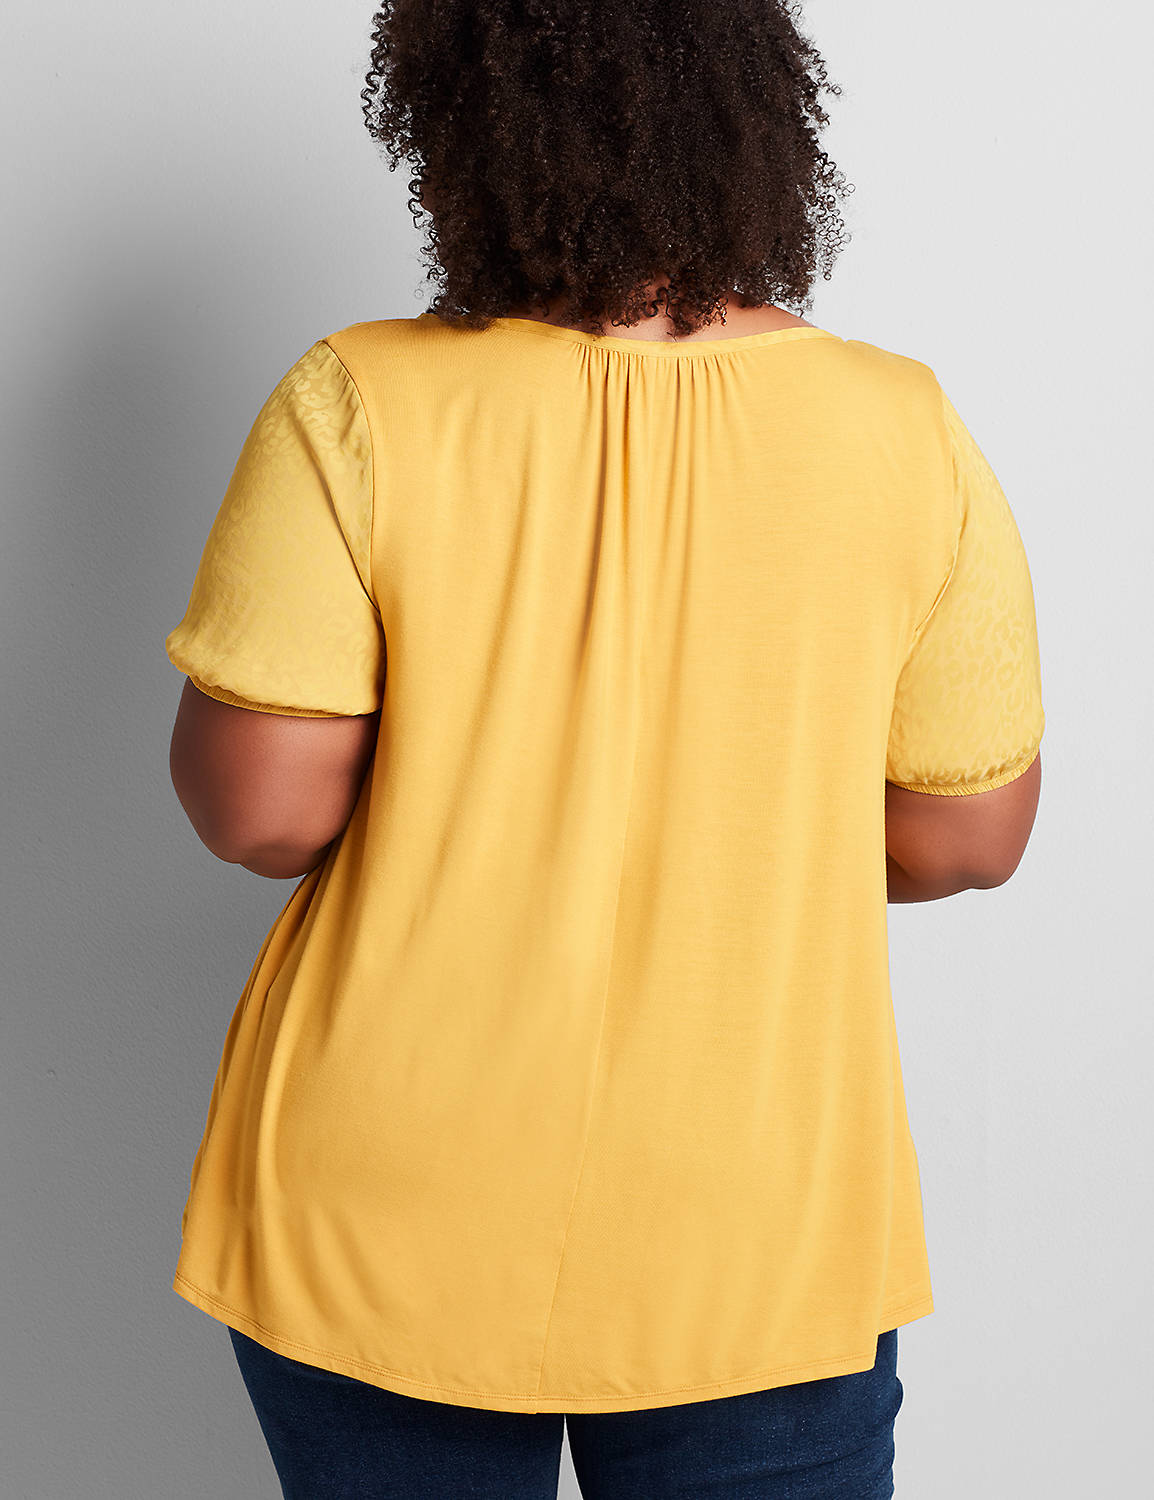 Short Sleeve Notch Neck Swing Woven Mix Top 1113810:PANTONE Golden Spice:14/16 Product Image 2